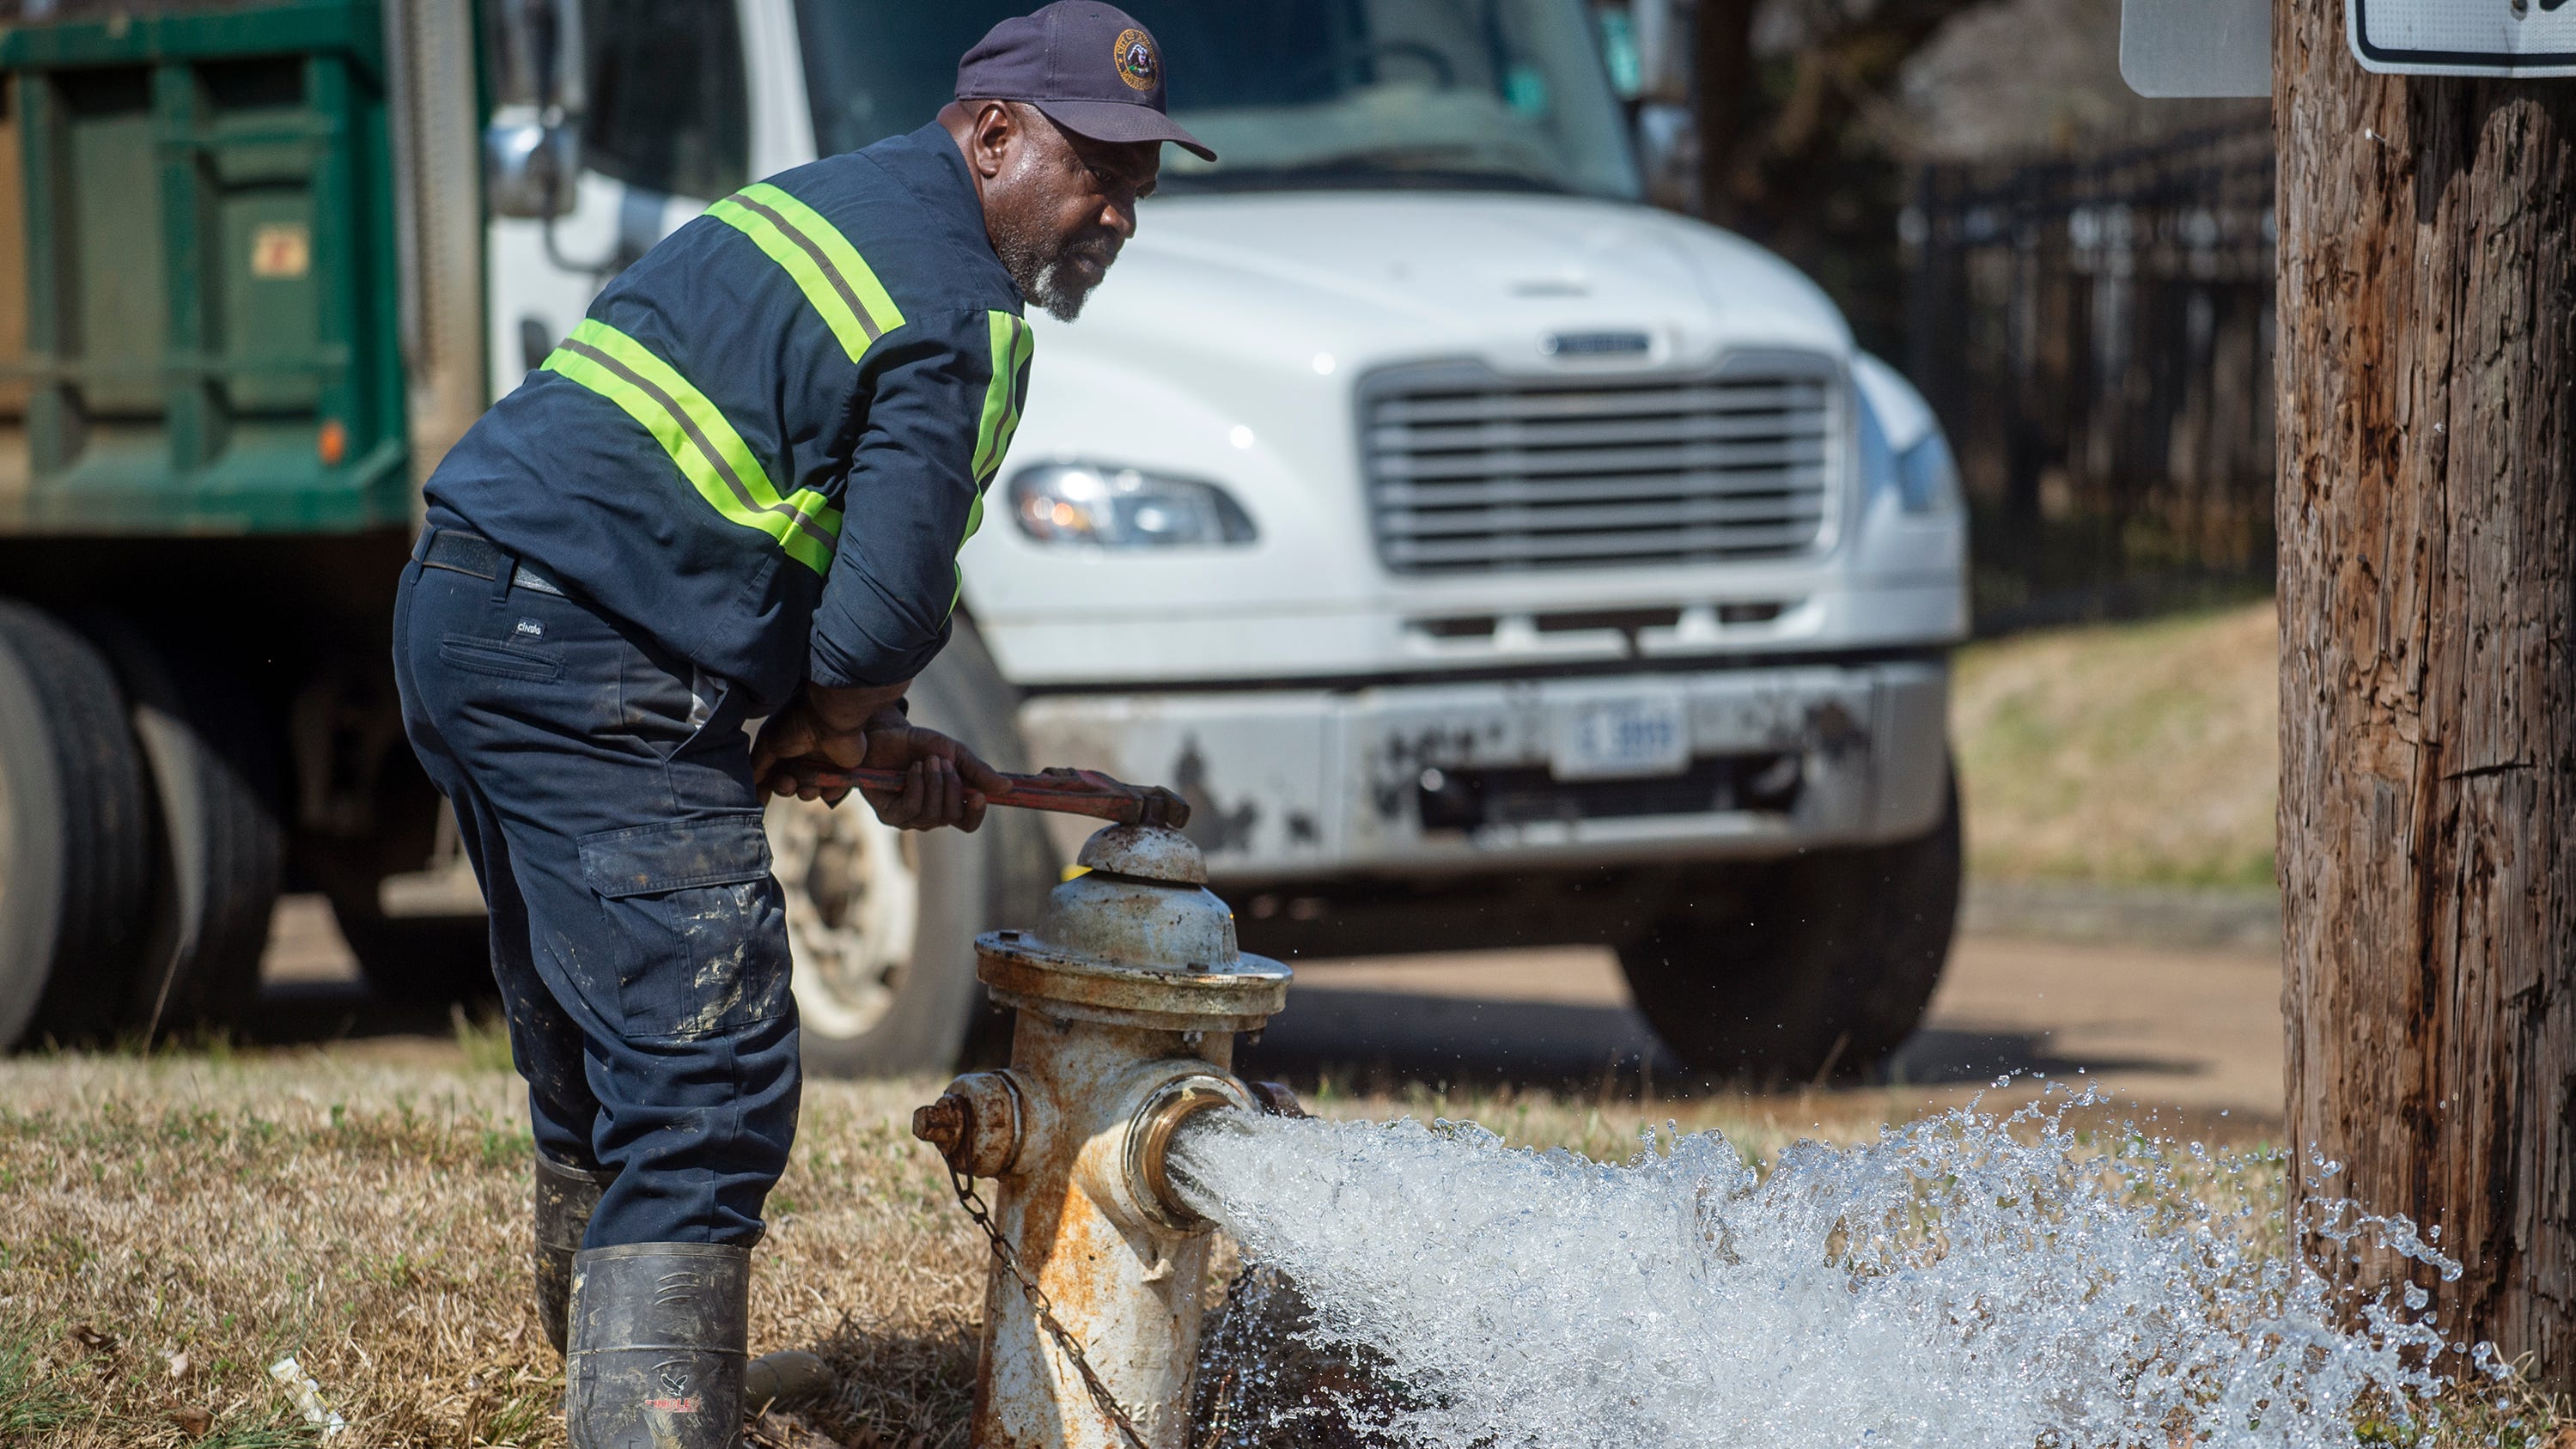 Water crisis Day 10: City of Jackson announces new main breaks, water distribution Friday - Jackson Clarion Ledger